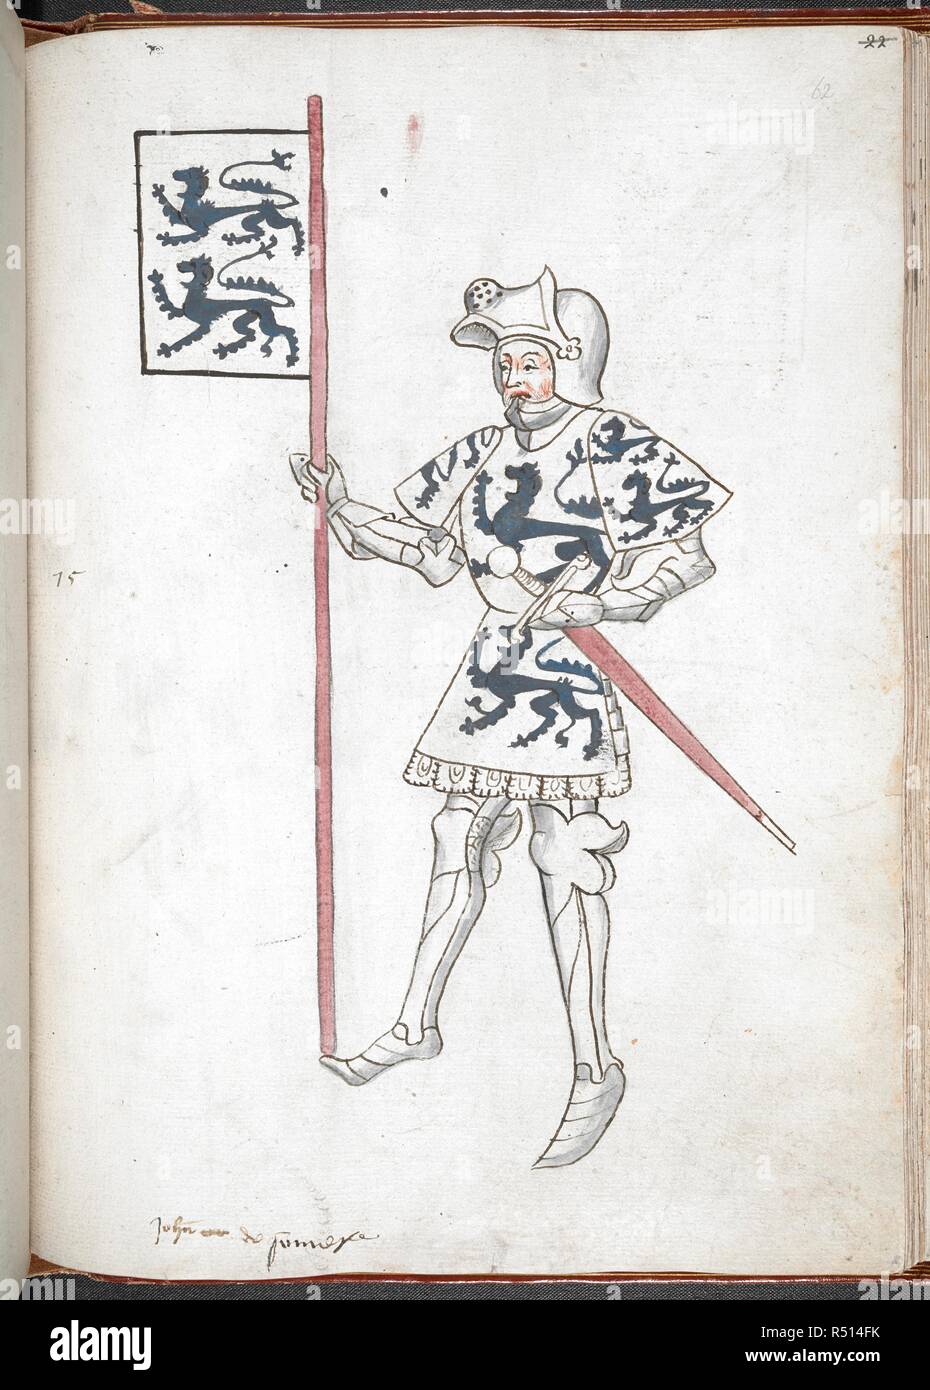 Coloured drawing of a knight in armour and tabard. Legh's Men of Arms (manuscript also known as Sir Thomas Holme's Book of Arms). England, S. E. (probably London). Last quarter of the 15th century or 1st quarter of the 16th century. Source: Harley 4205 f.62. Language: French (names of the knights). Gothic cursive. Author: Legh, Roger. Stock Photo